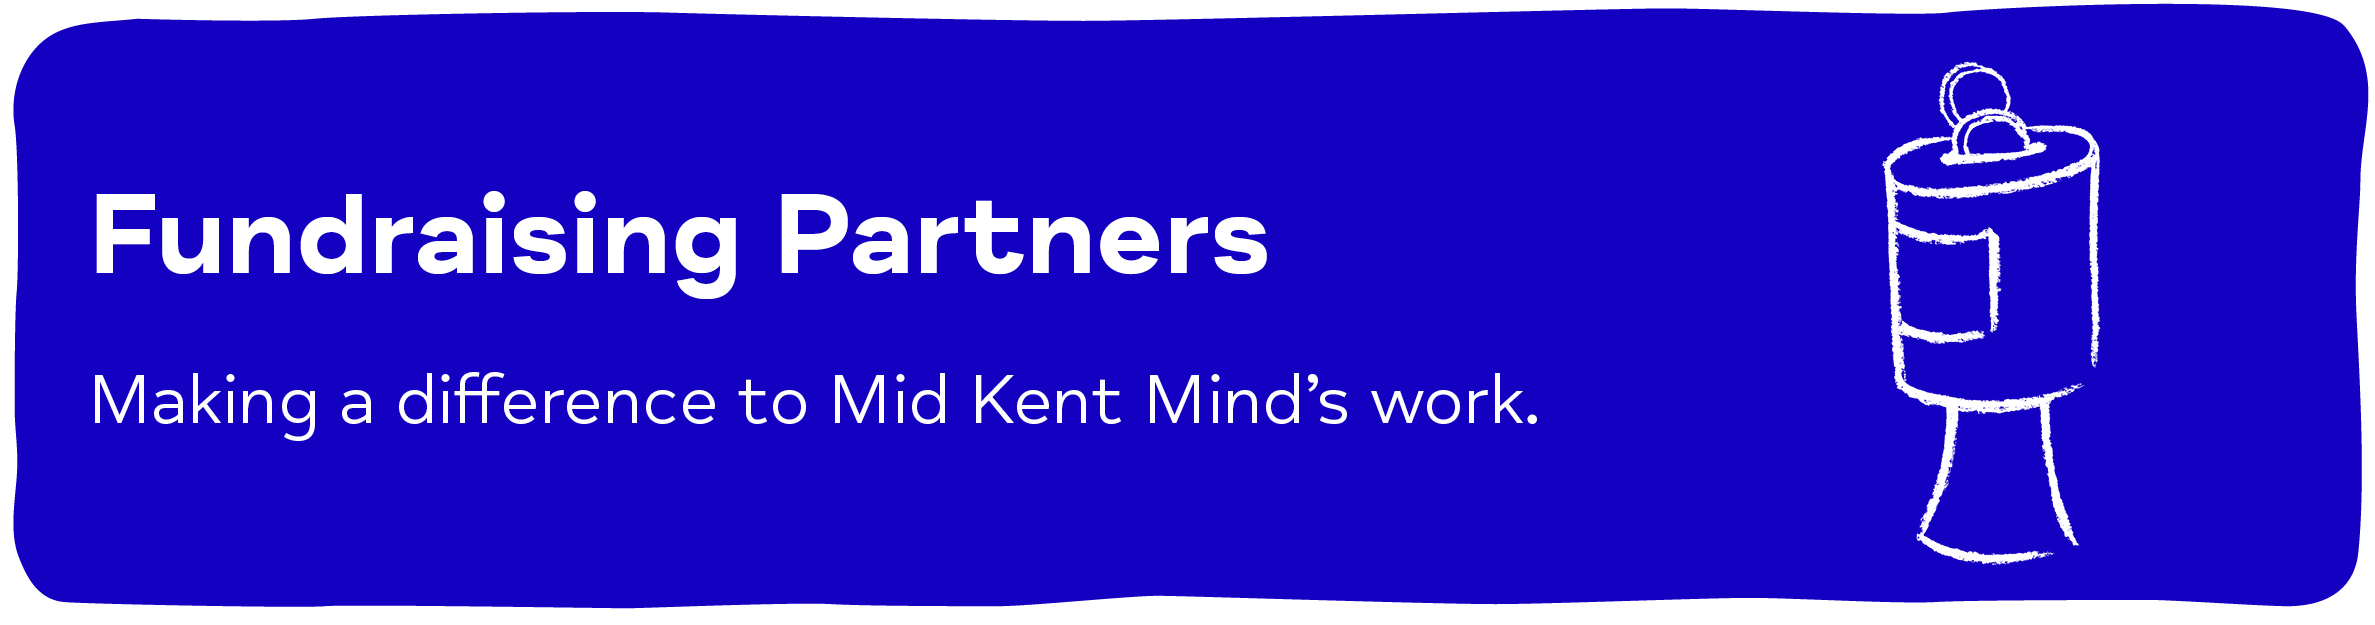 Fundraising Partners - Making a difference to Mid Kent Mind's work.